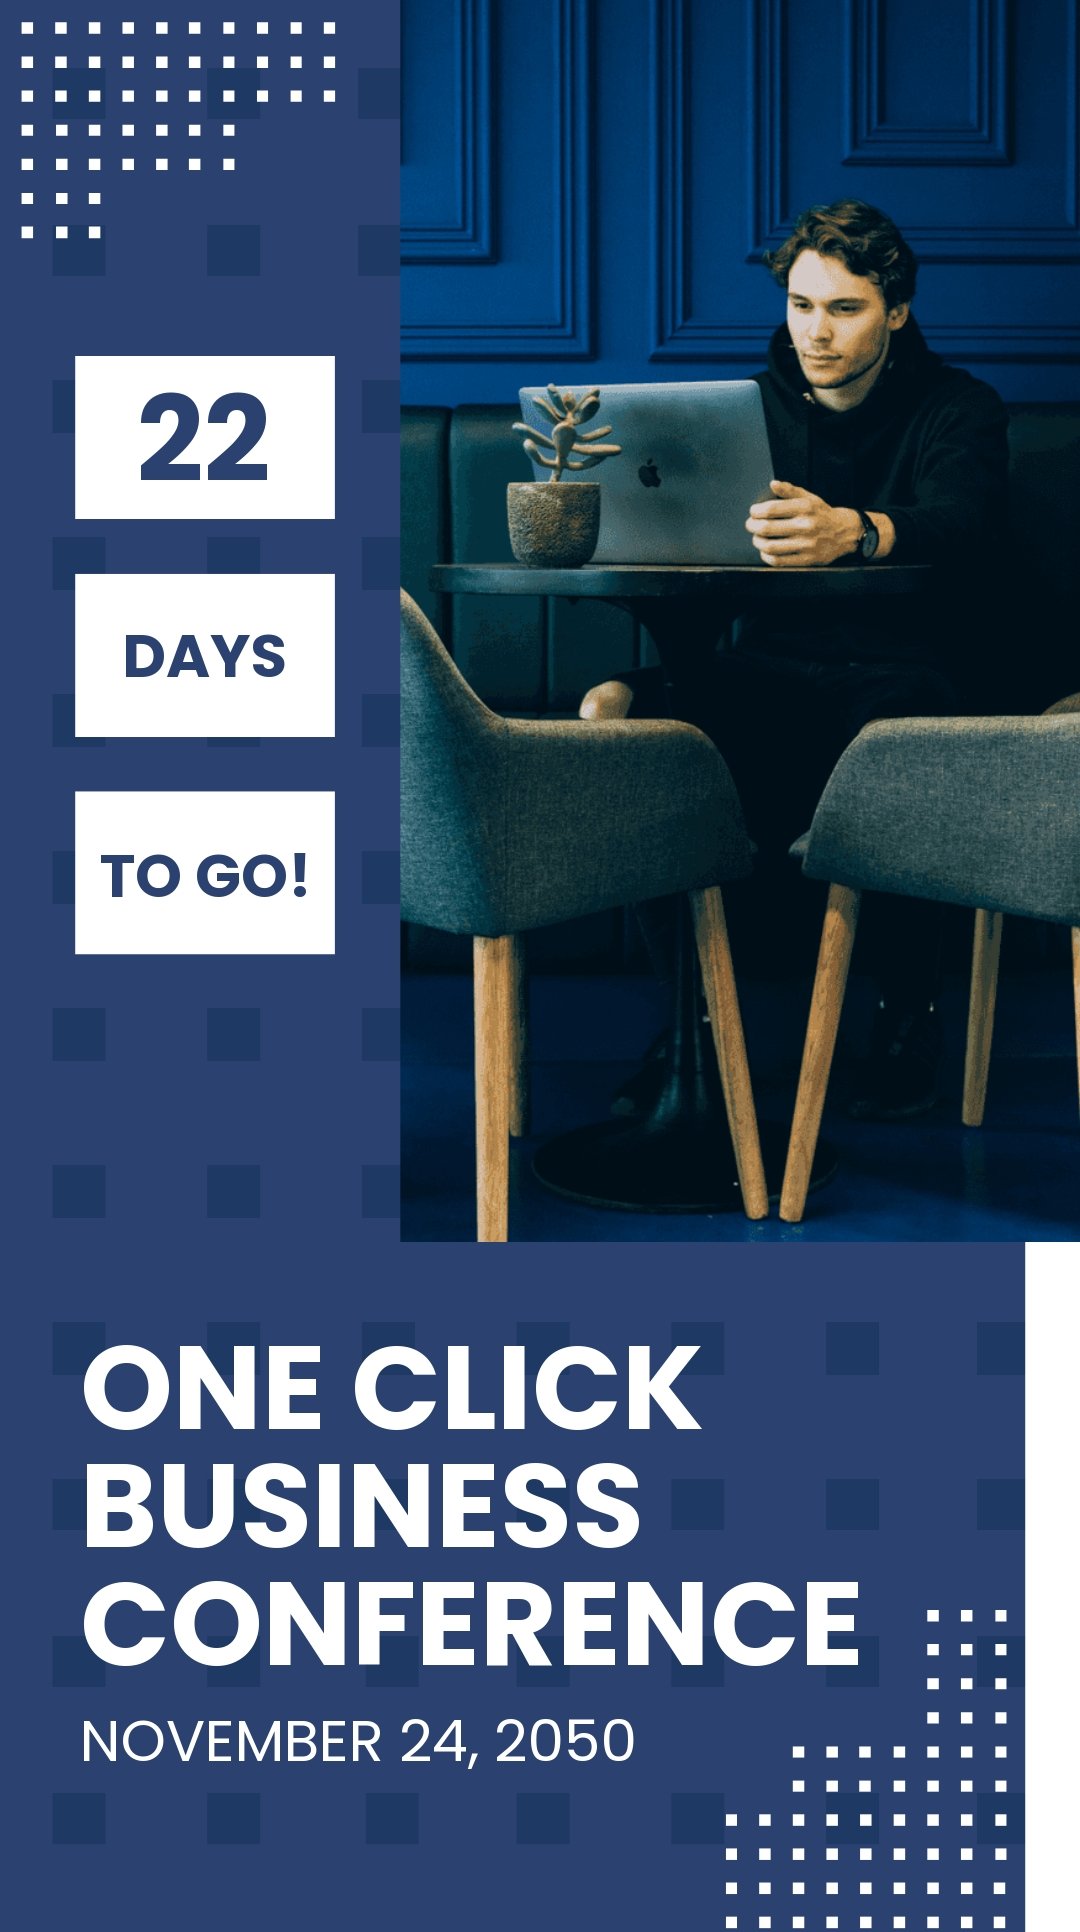 Free Conference Countdown Instagram Story